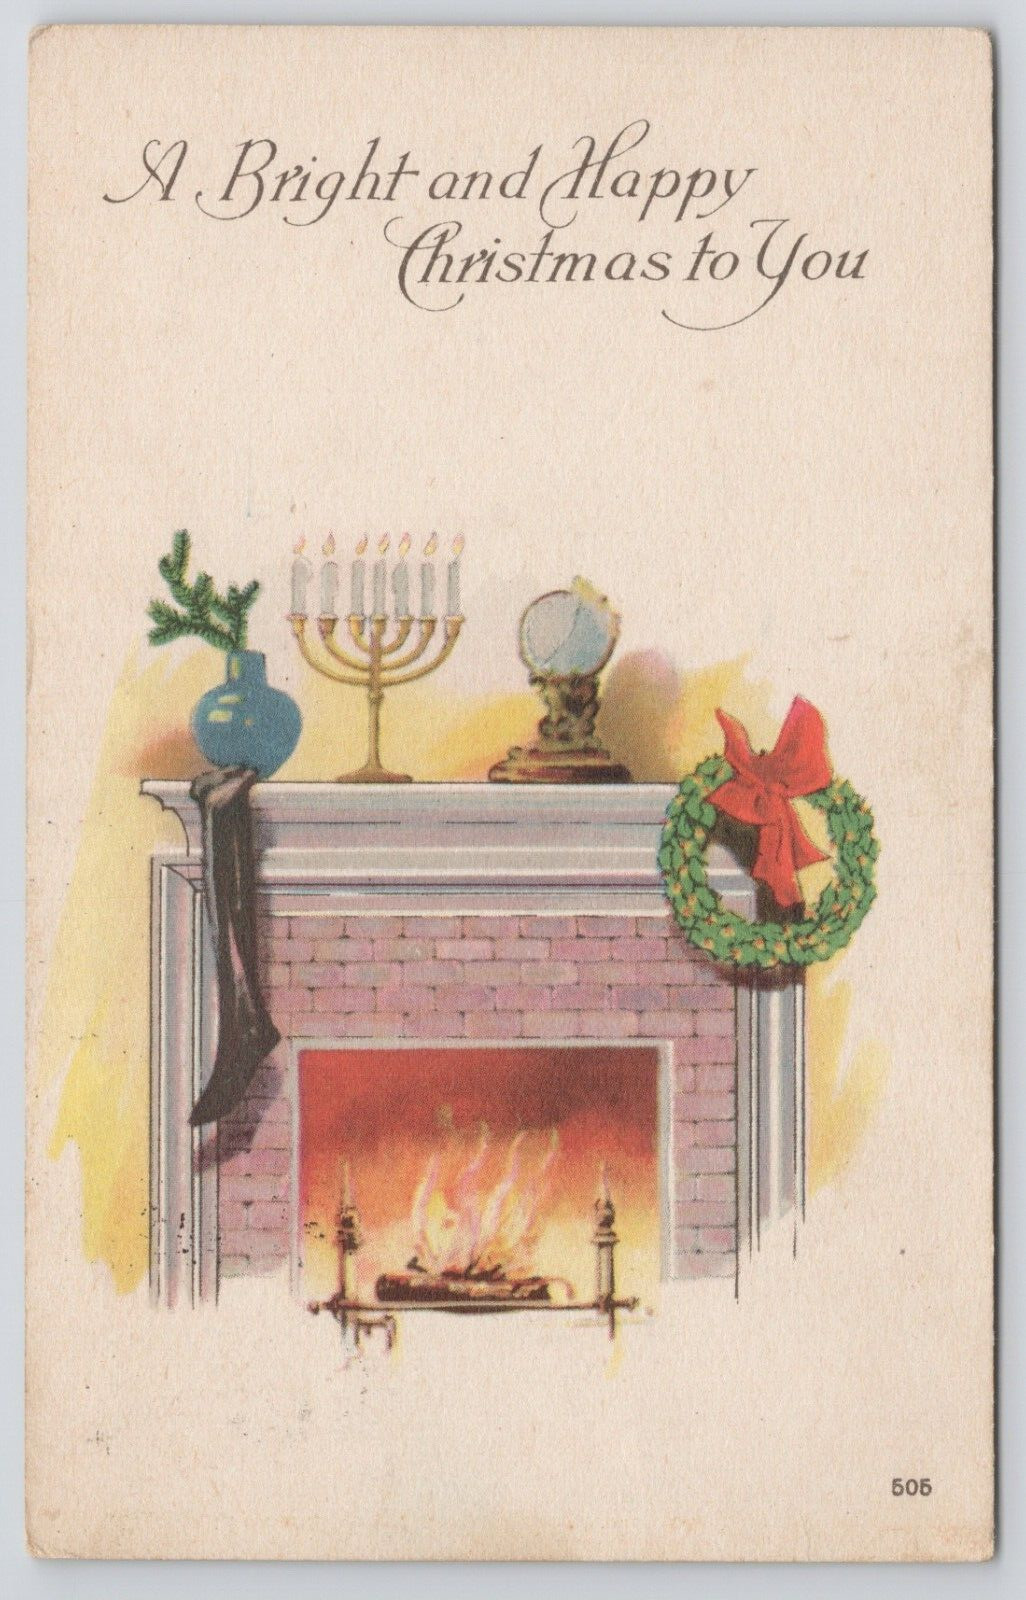 Merry Christmas Greeting Stocking, Candle, Fireplace 1924 Divided Back Postcard